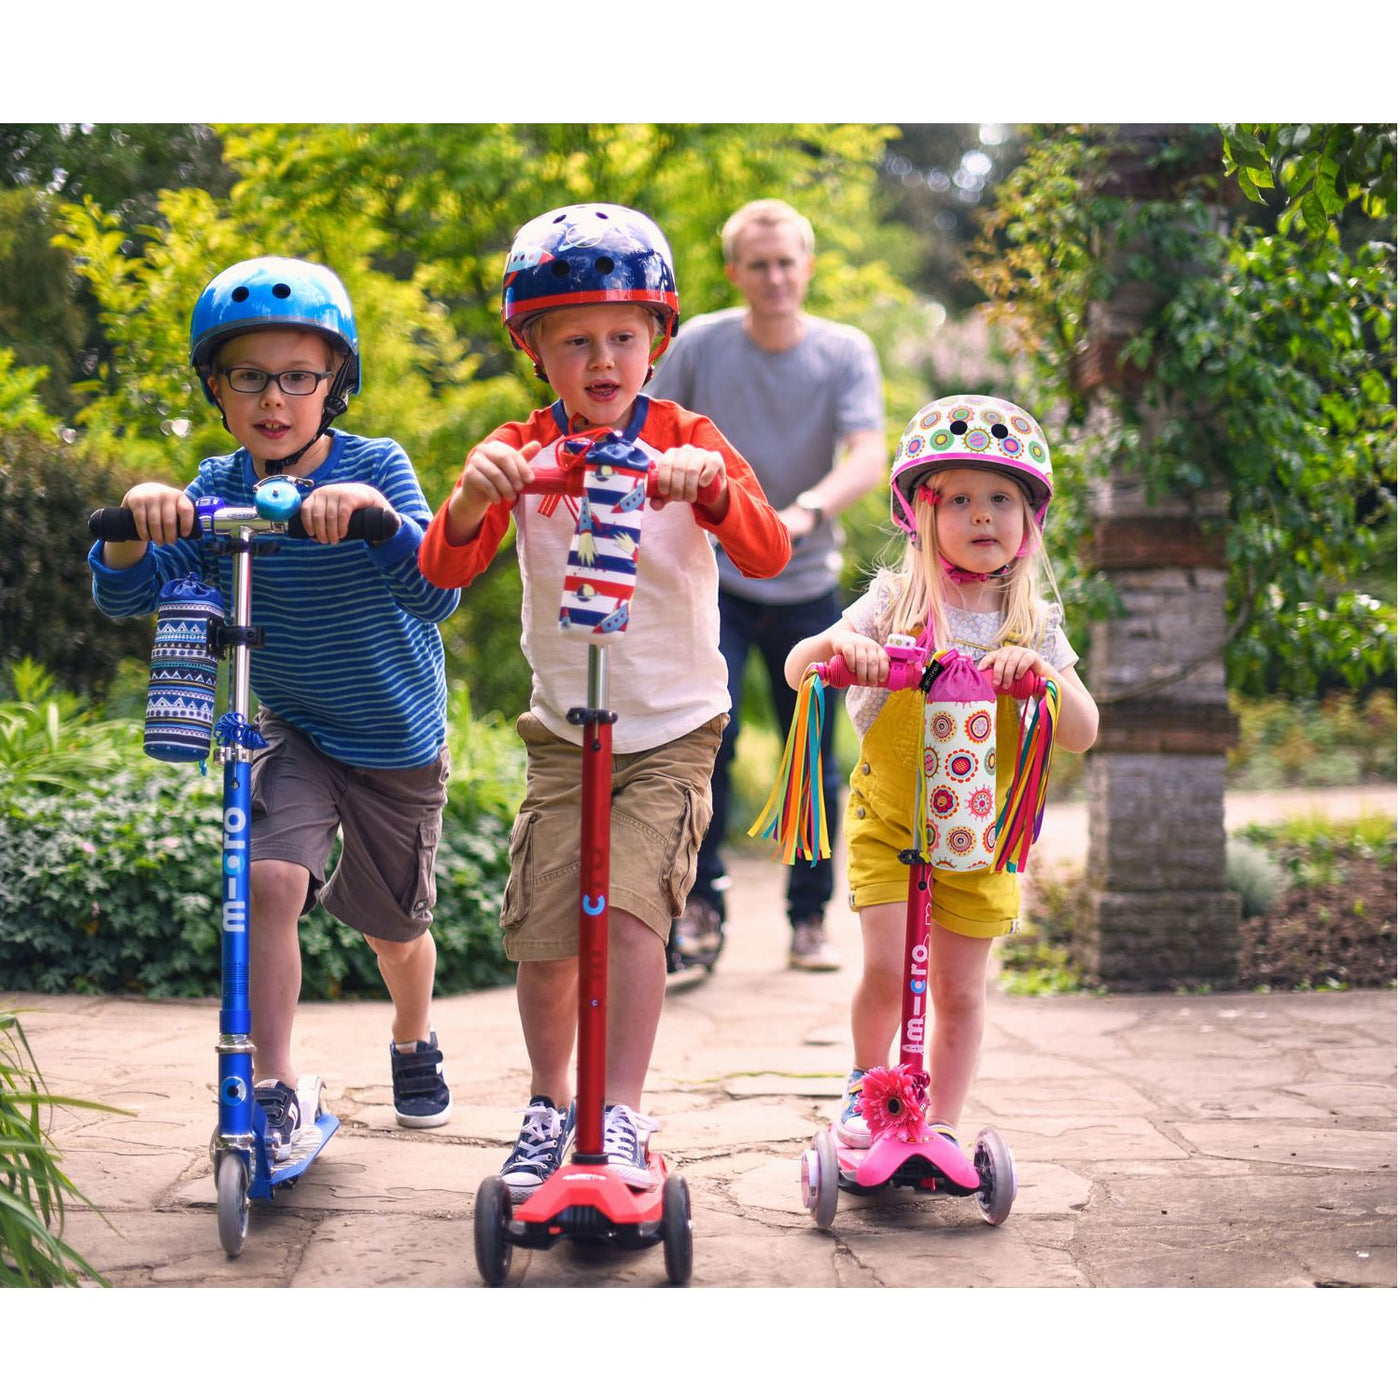 >Micro Kids Mini Deluxe Led Scooter Ages 2-5 (more colors)